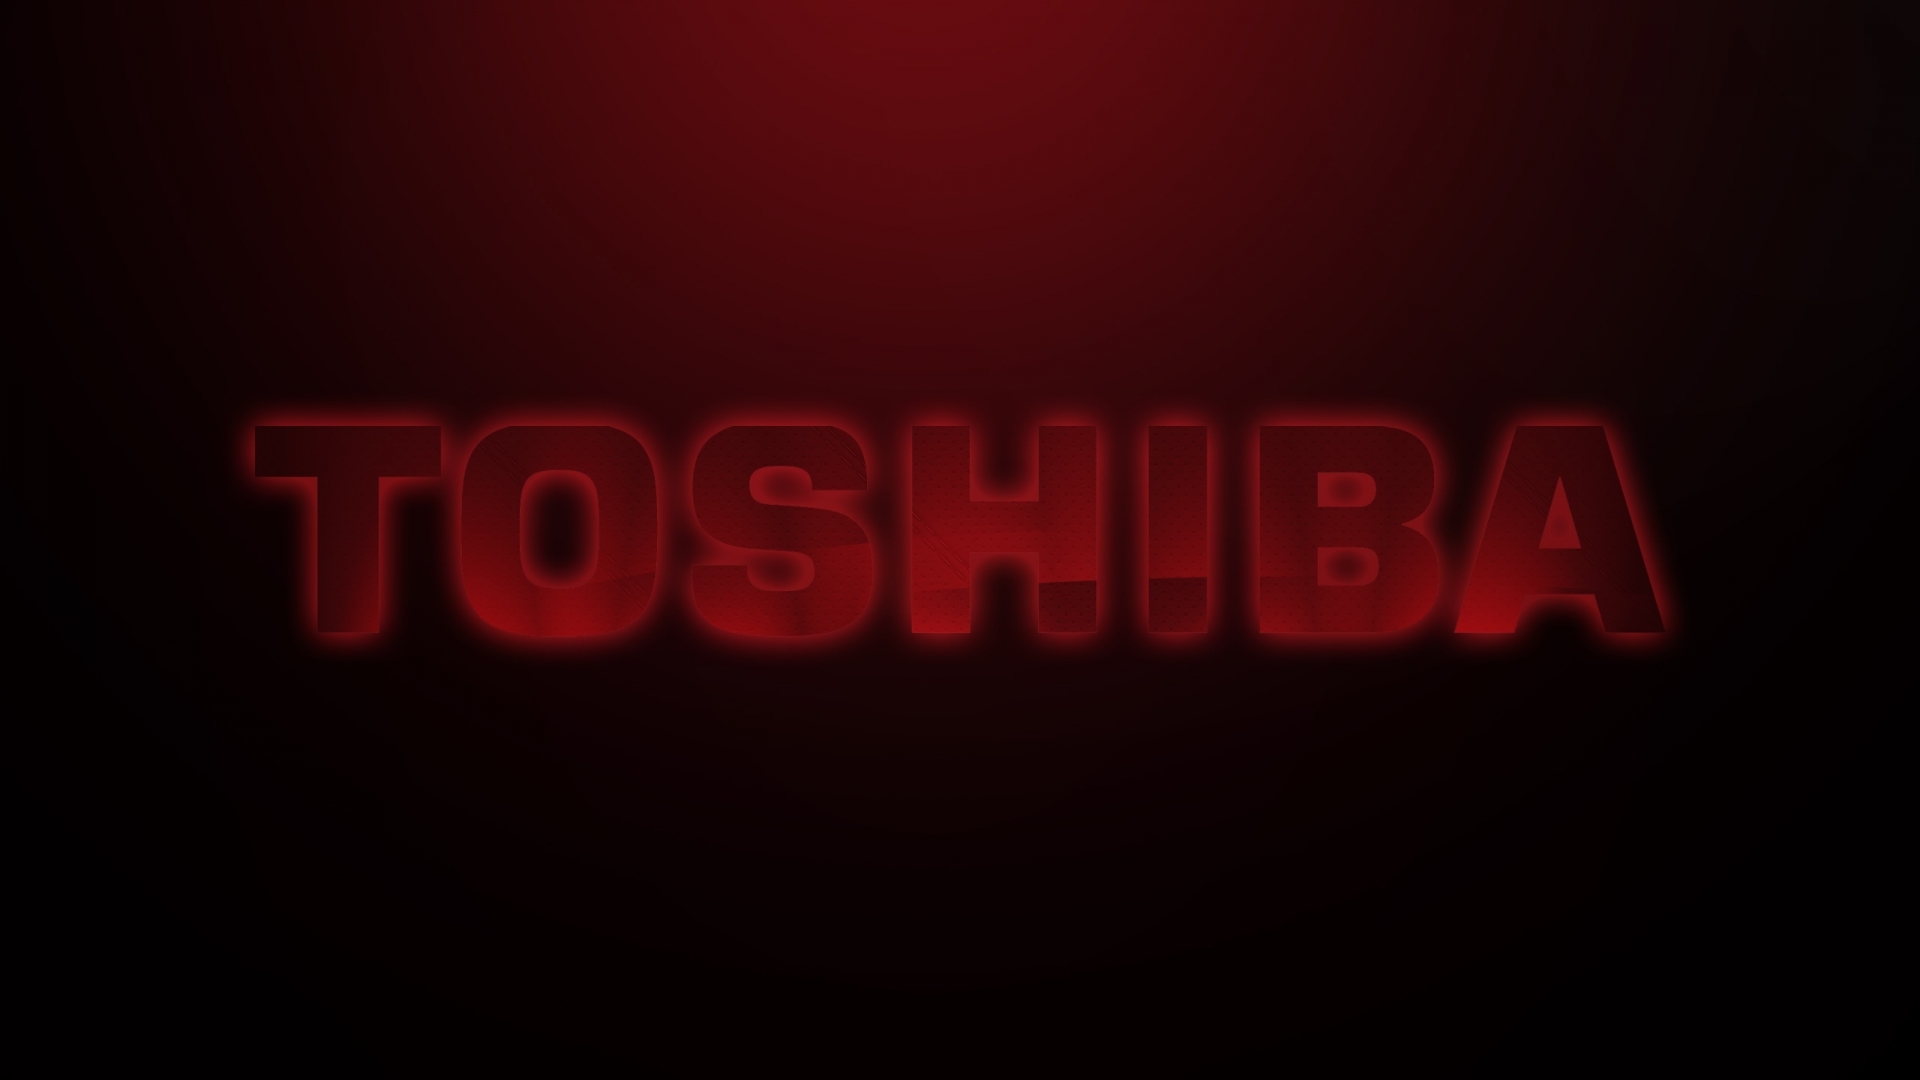 Toshiba red style for 1920 x 1080 HDTV 1080p resolution